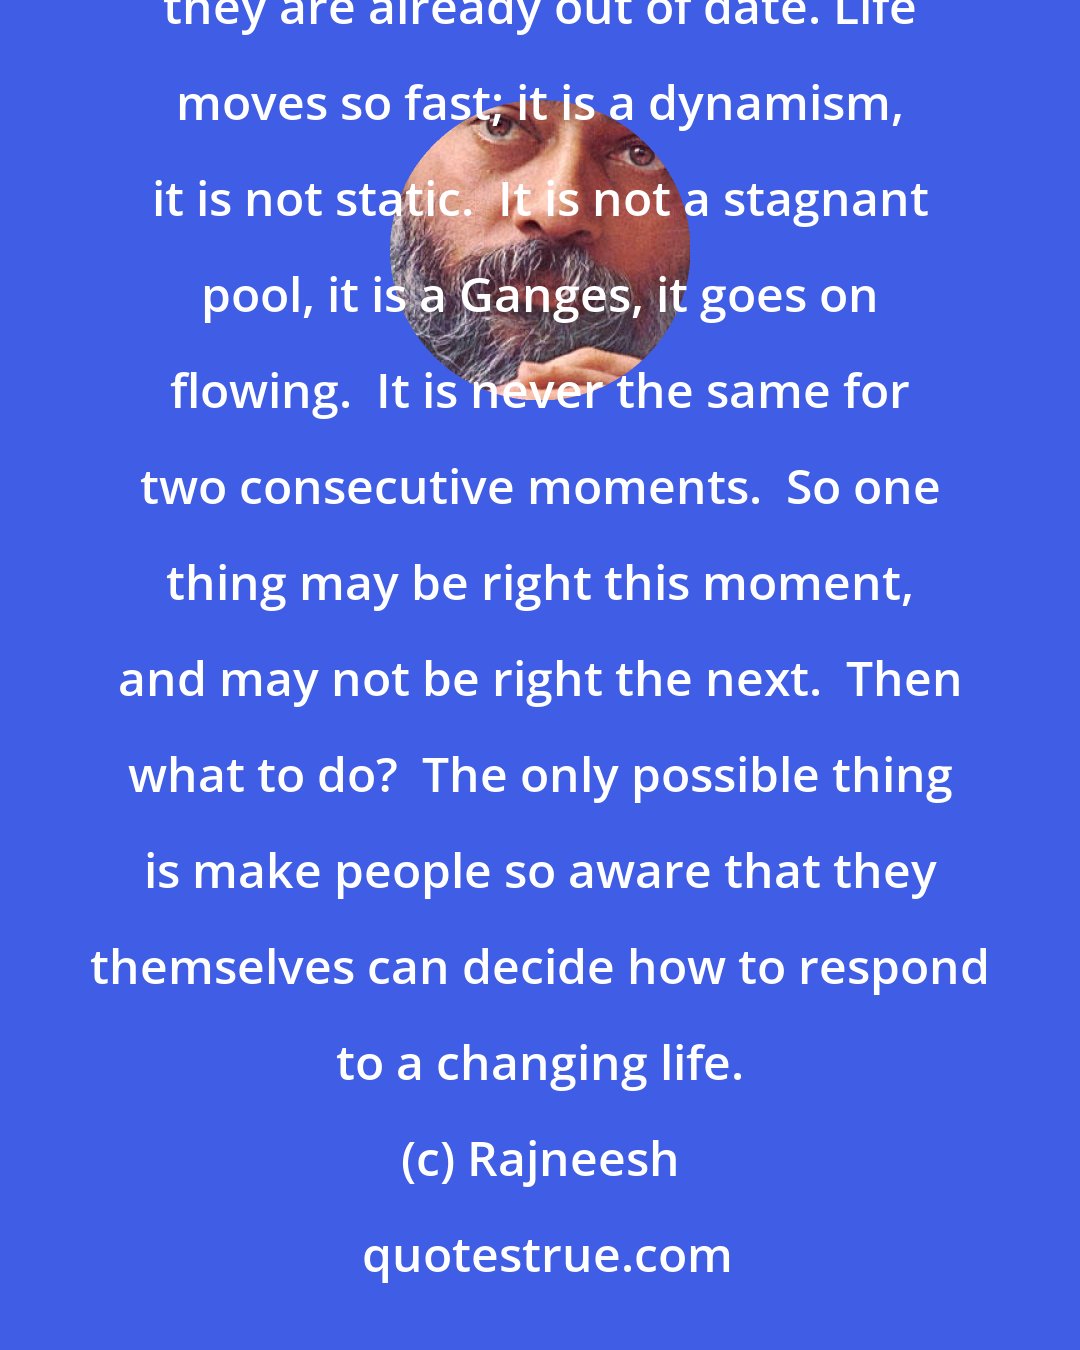 Rajneesh: Whenever commandments are given they create difficulties for people, because by the time they are given they are already out of date. Life moves so fast; it is a dynamism, it is not static.  It is not a stagnant pool, it is a Ganges, it goes on flowing.  It is never the same for two consecutive moments.  So one thing may be right this moment, and may not be right the next.  Then what to do?  The only possible thing is make people so aware that they themselves can decide how to respond to a changing life.